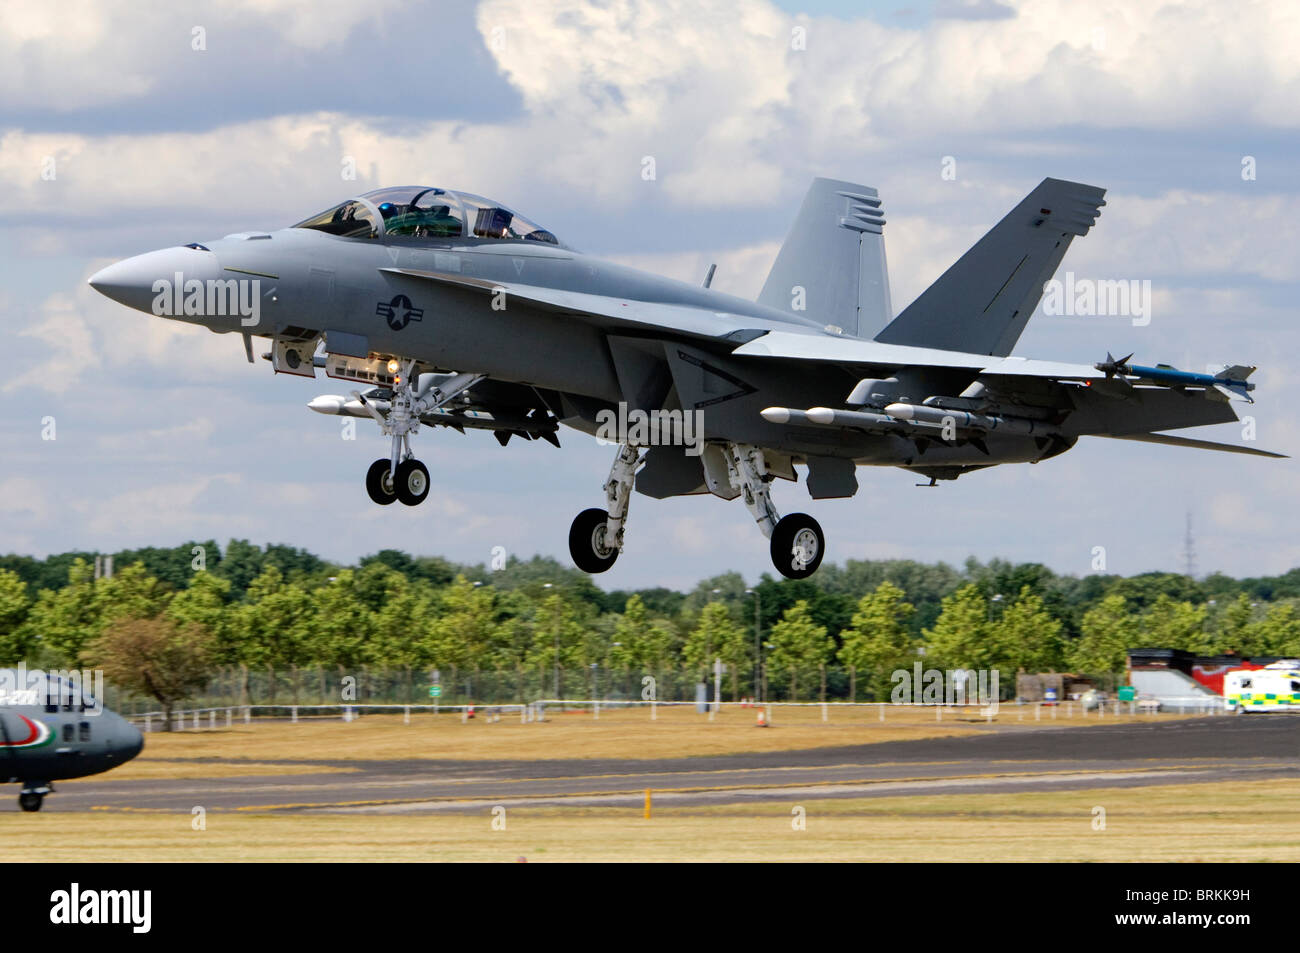 Boeing F/A-18F Super Hornet jet fighter operated by the US Navy landing at Farnborough Airshow, Farnborough, UK. Stock Photo